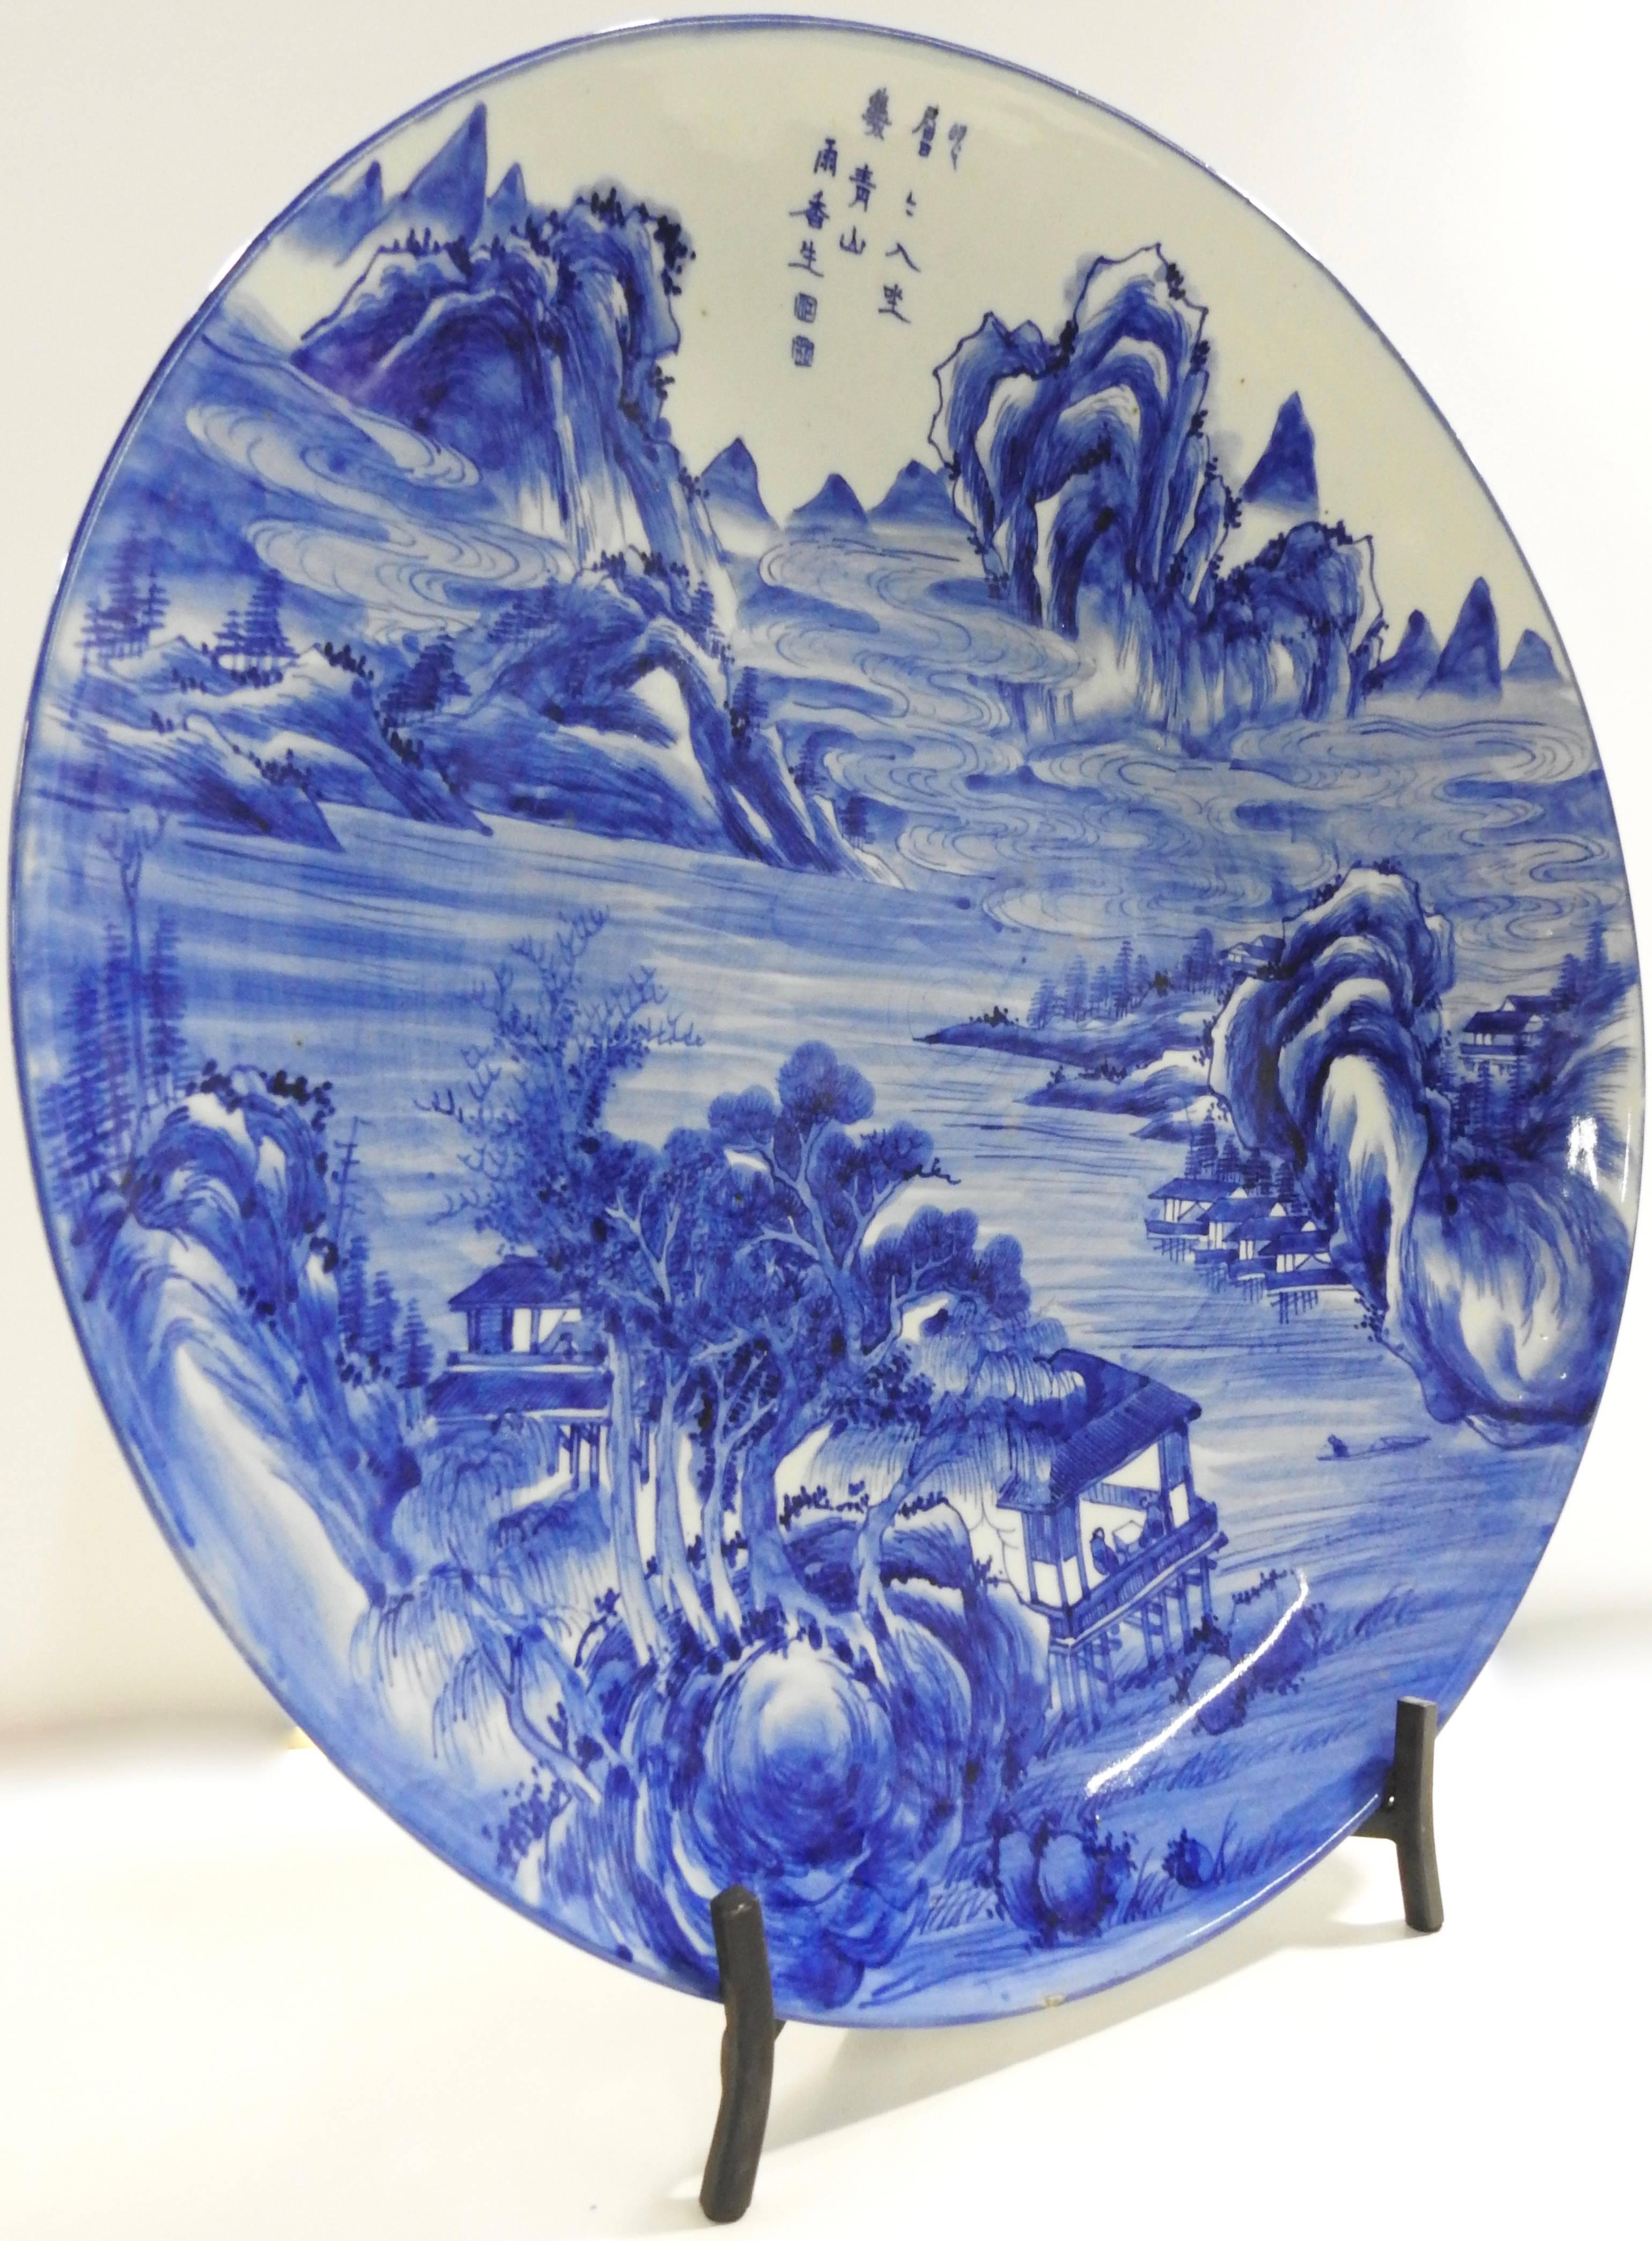 We are offering a massive hand painted blue and white plate from China. A swirling water scene flows through the mountains and Classic buildings are surrounded by trees. The back of the plate has ribbons of flowers along the perimeter. The piece is